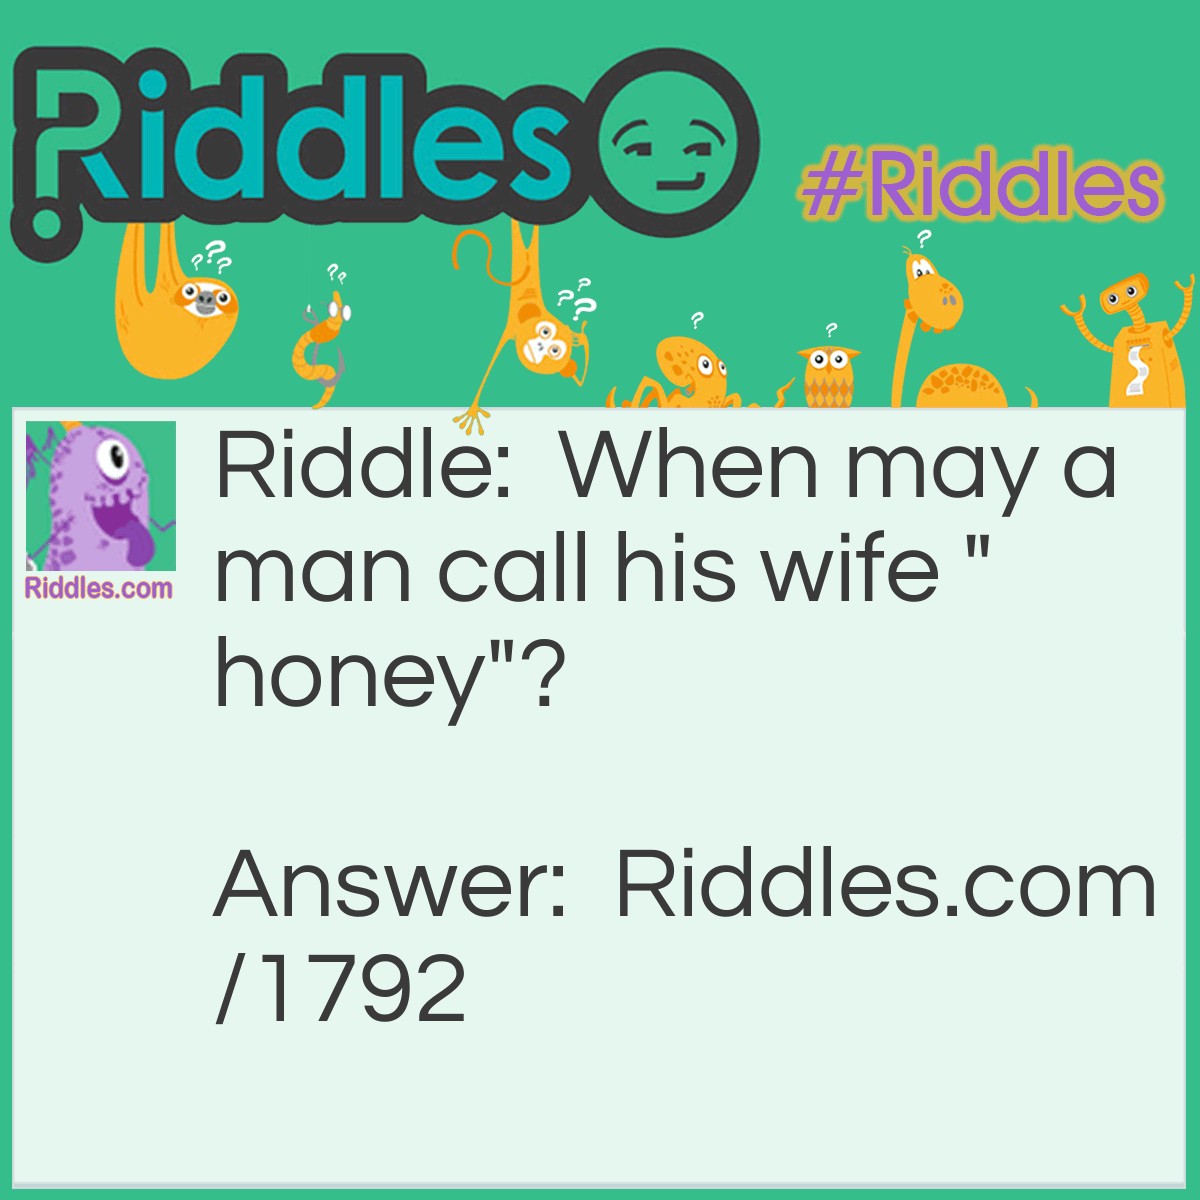 Riddle: When may a man call his wife "honey"? Answer: When she has a comb in her hair.